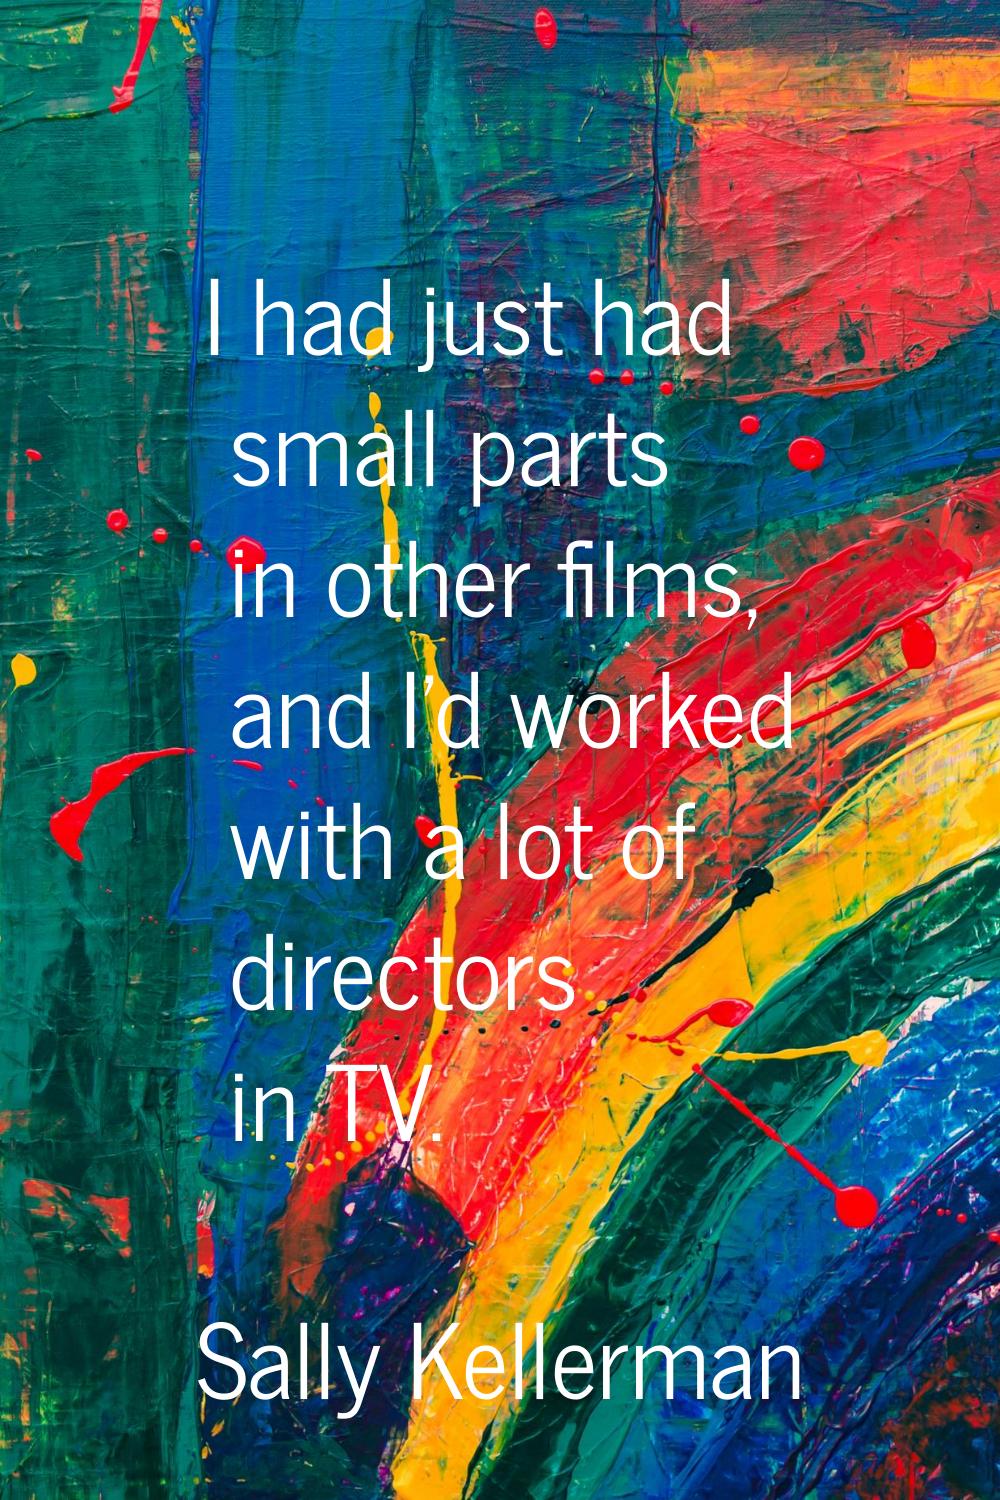 I had just had small parts in other films, and I'd worked with a lot of directors in TV.